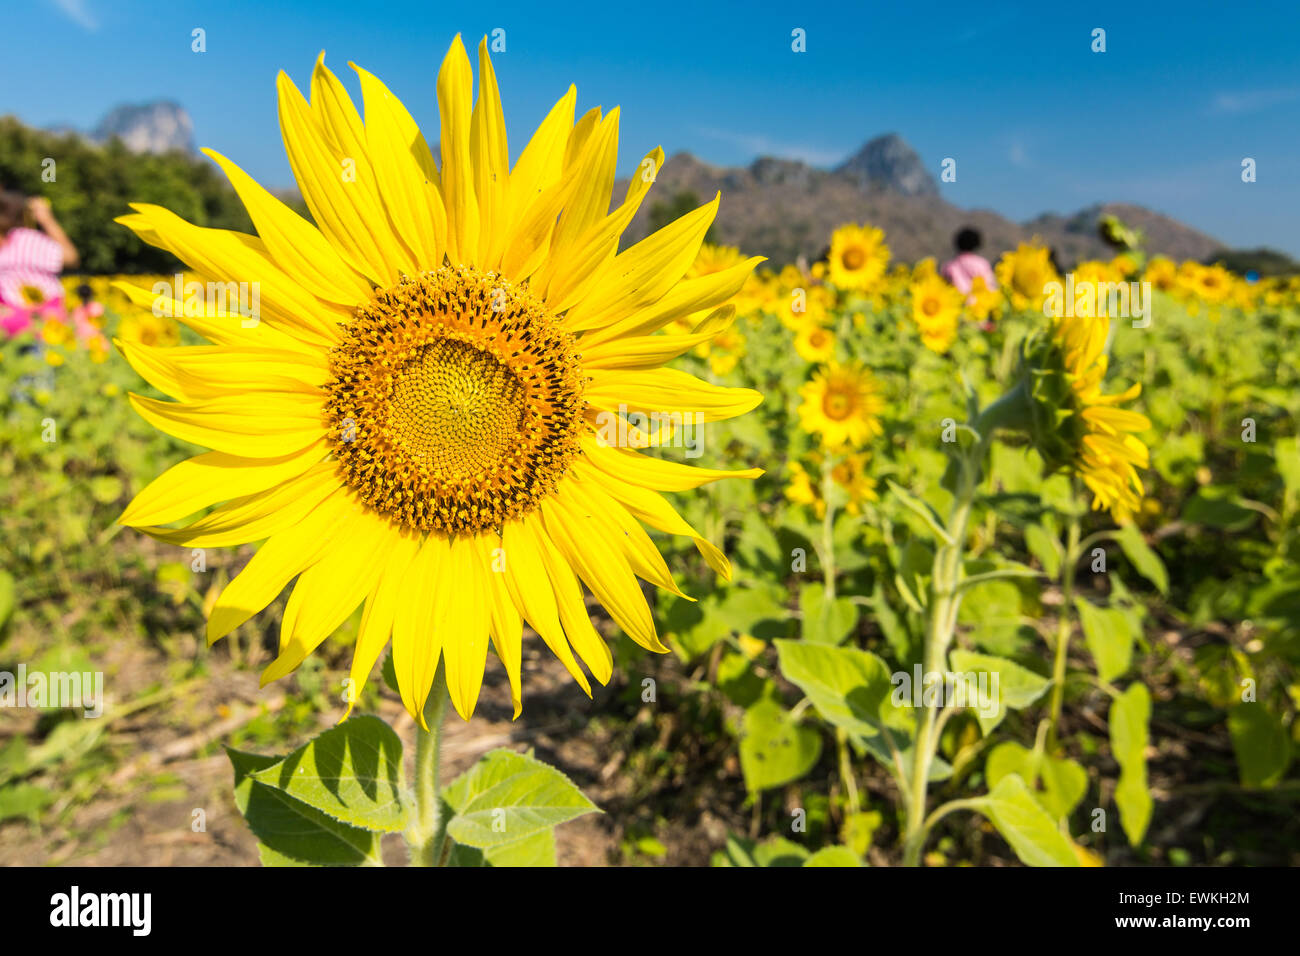 Beautiful landscape with sunflower field over blue sky Stock Photo